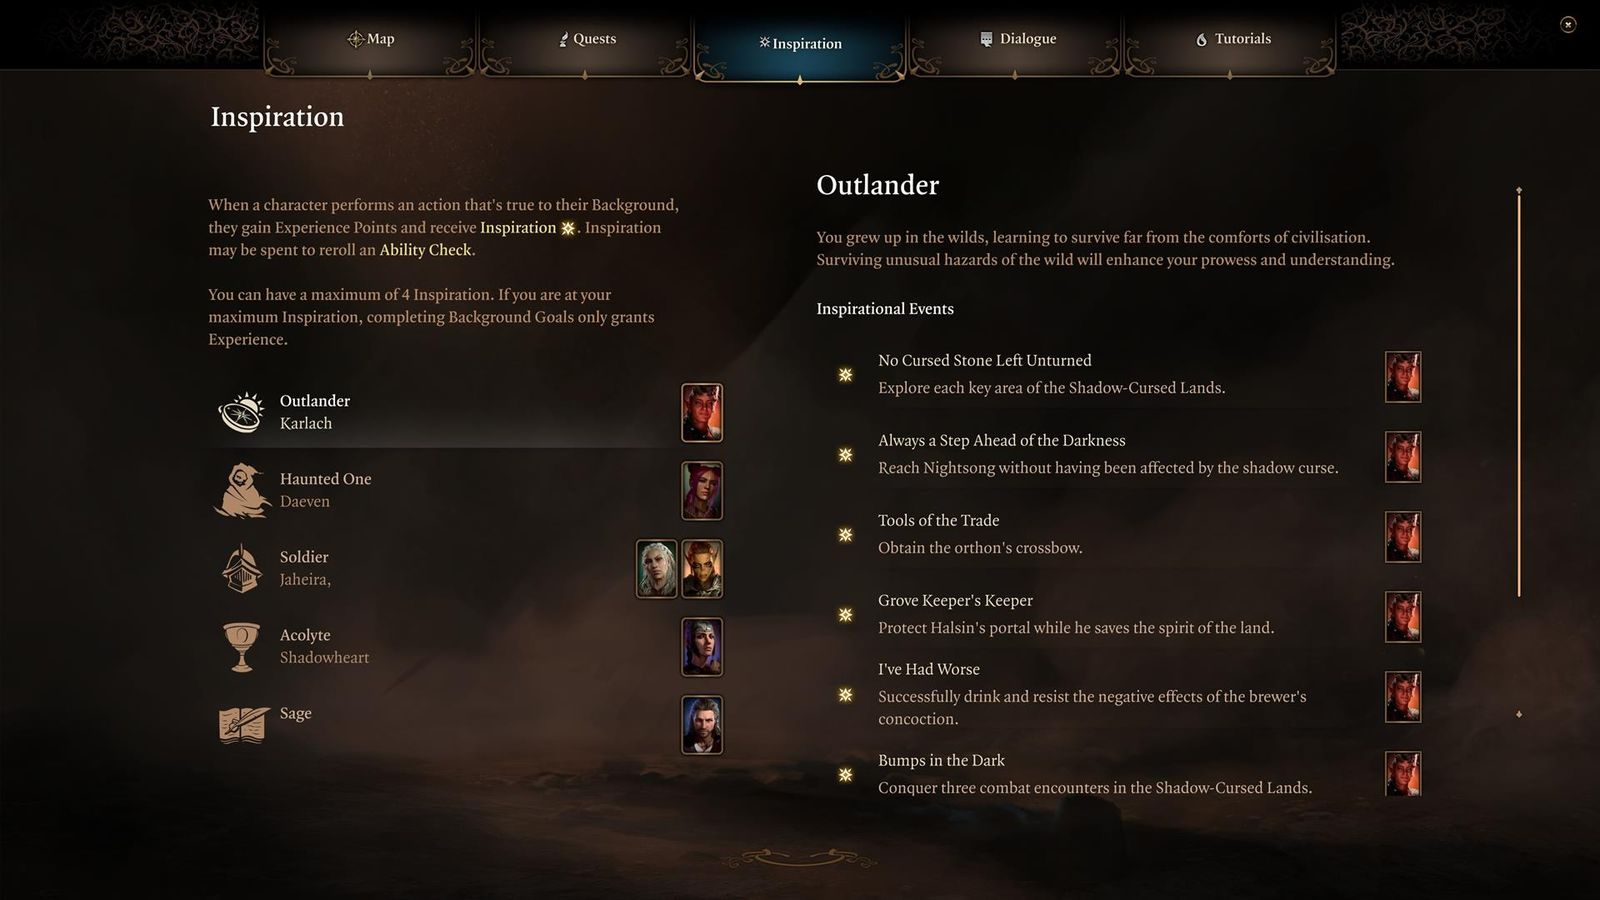 The menu shows various Outlander inspirations that you can discover.